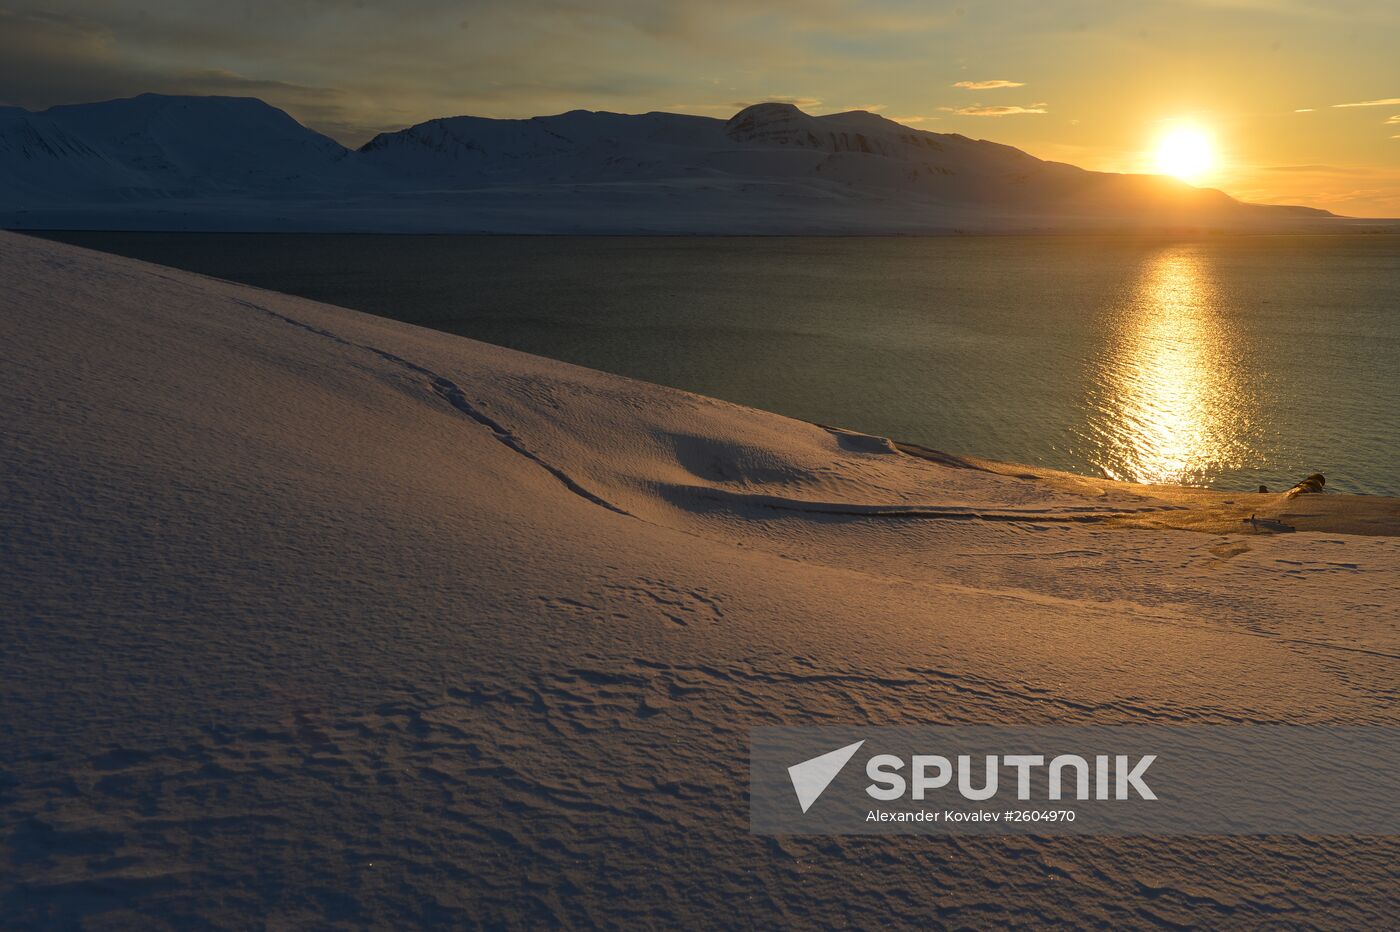 High-latitude expedition to Spitsbergen (Svalbard) under Arctic-2015 project